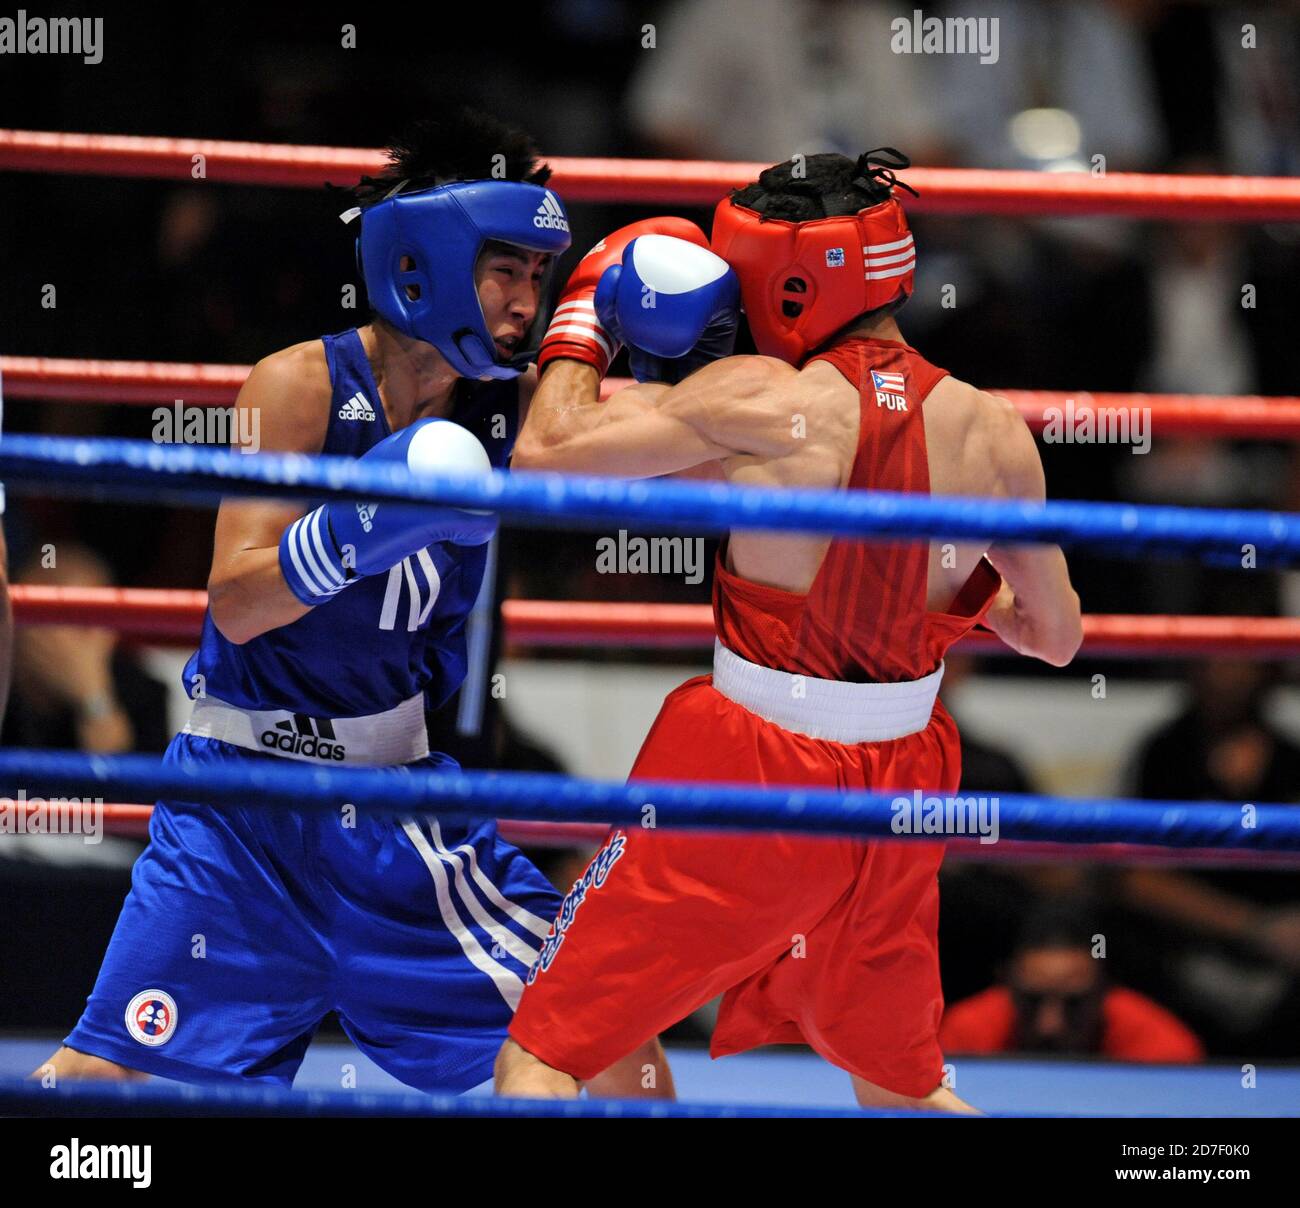 Boxers Fighting During An Amateur Boxing Match During The Aiba World Boxing Champioship In Milan